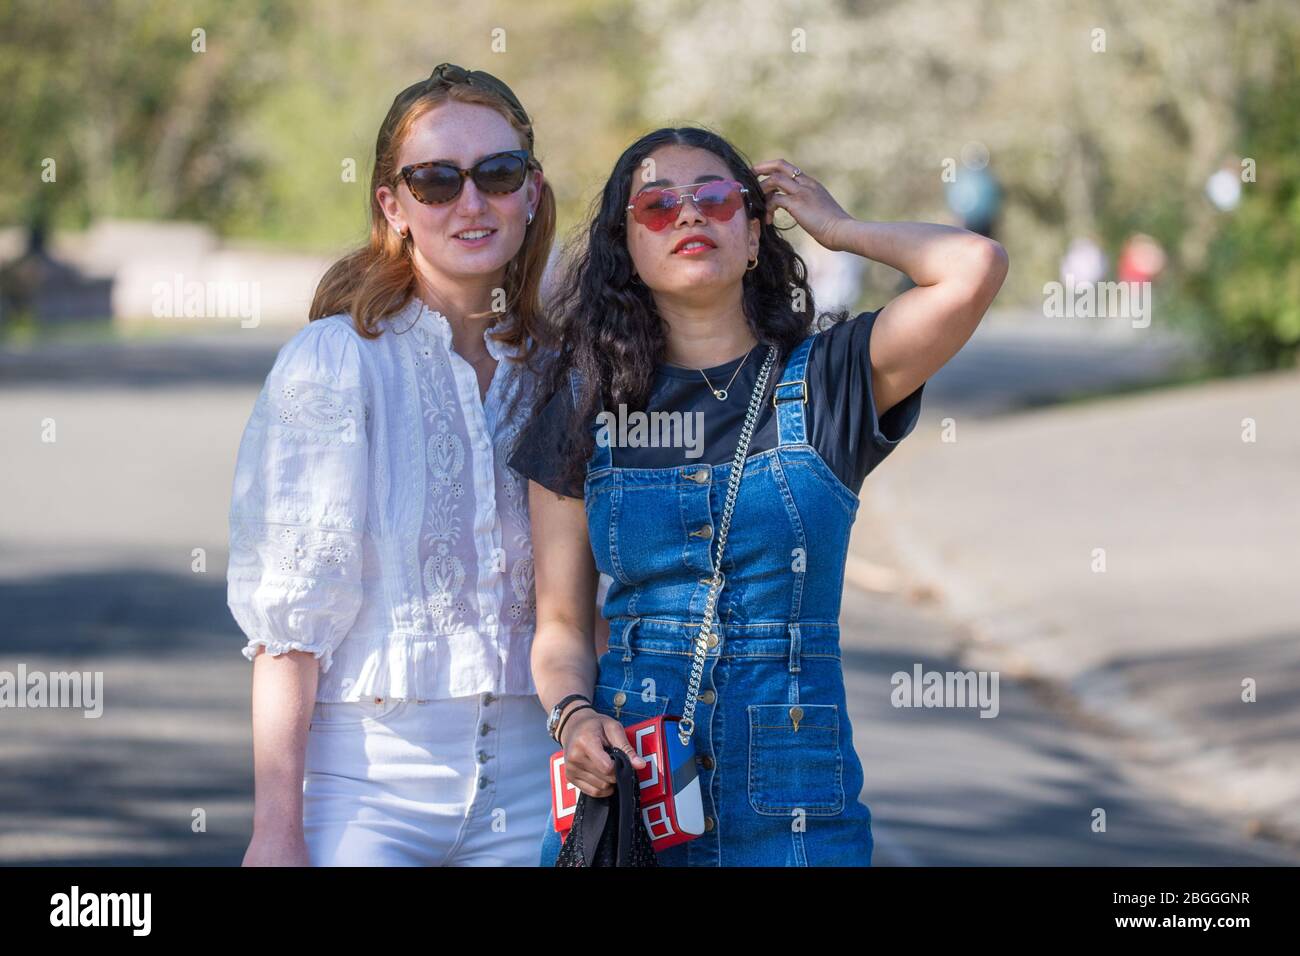 Glasgow, UK. 21st Apr, 2020. Pictured: People dress in summer fashion as they enjoy the warm sunshine and blue skies. Scenes from Kelvingrove Park in Glasgow during the coronavirus (COVID-19) lockdown. Credit: Colin Fisher/Alamy Live News Stock Photo